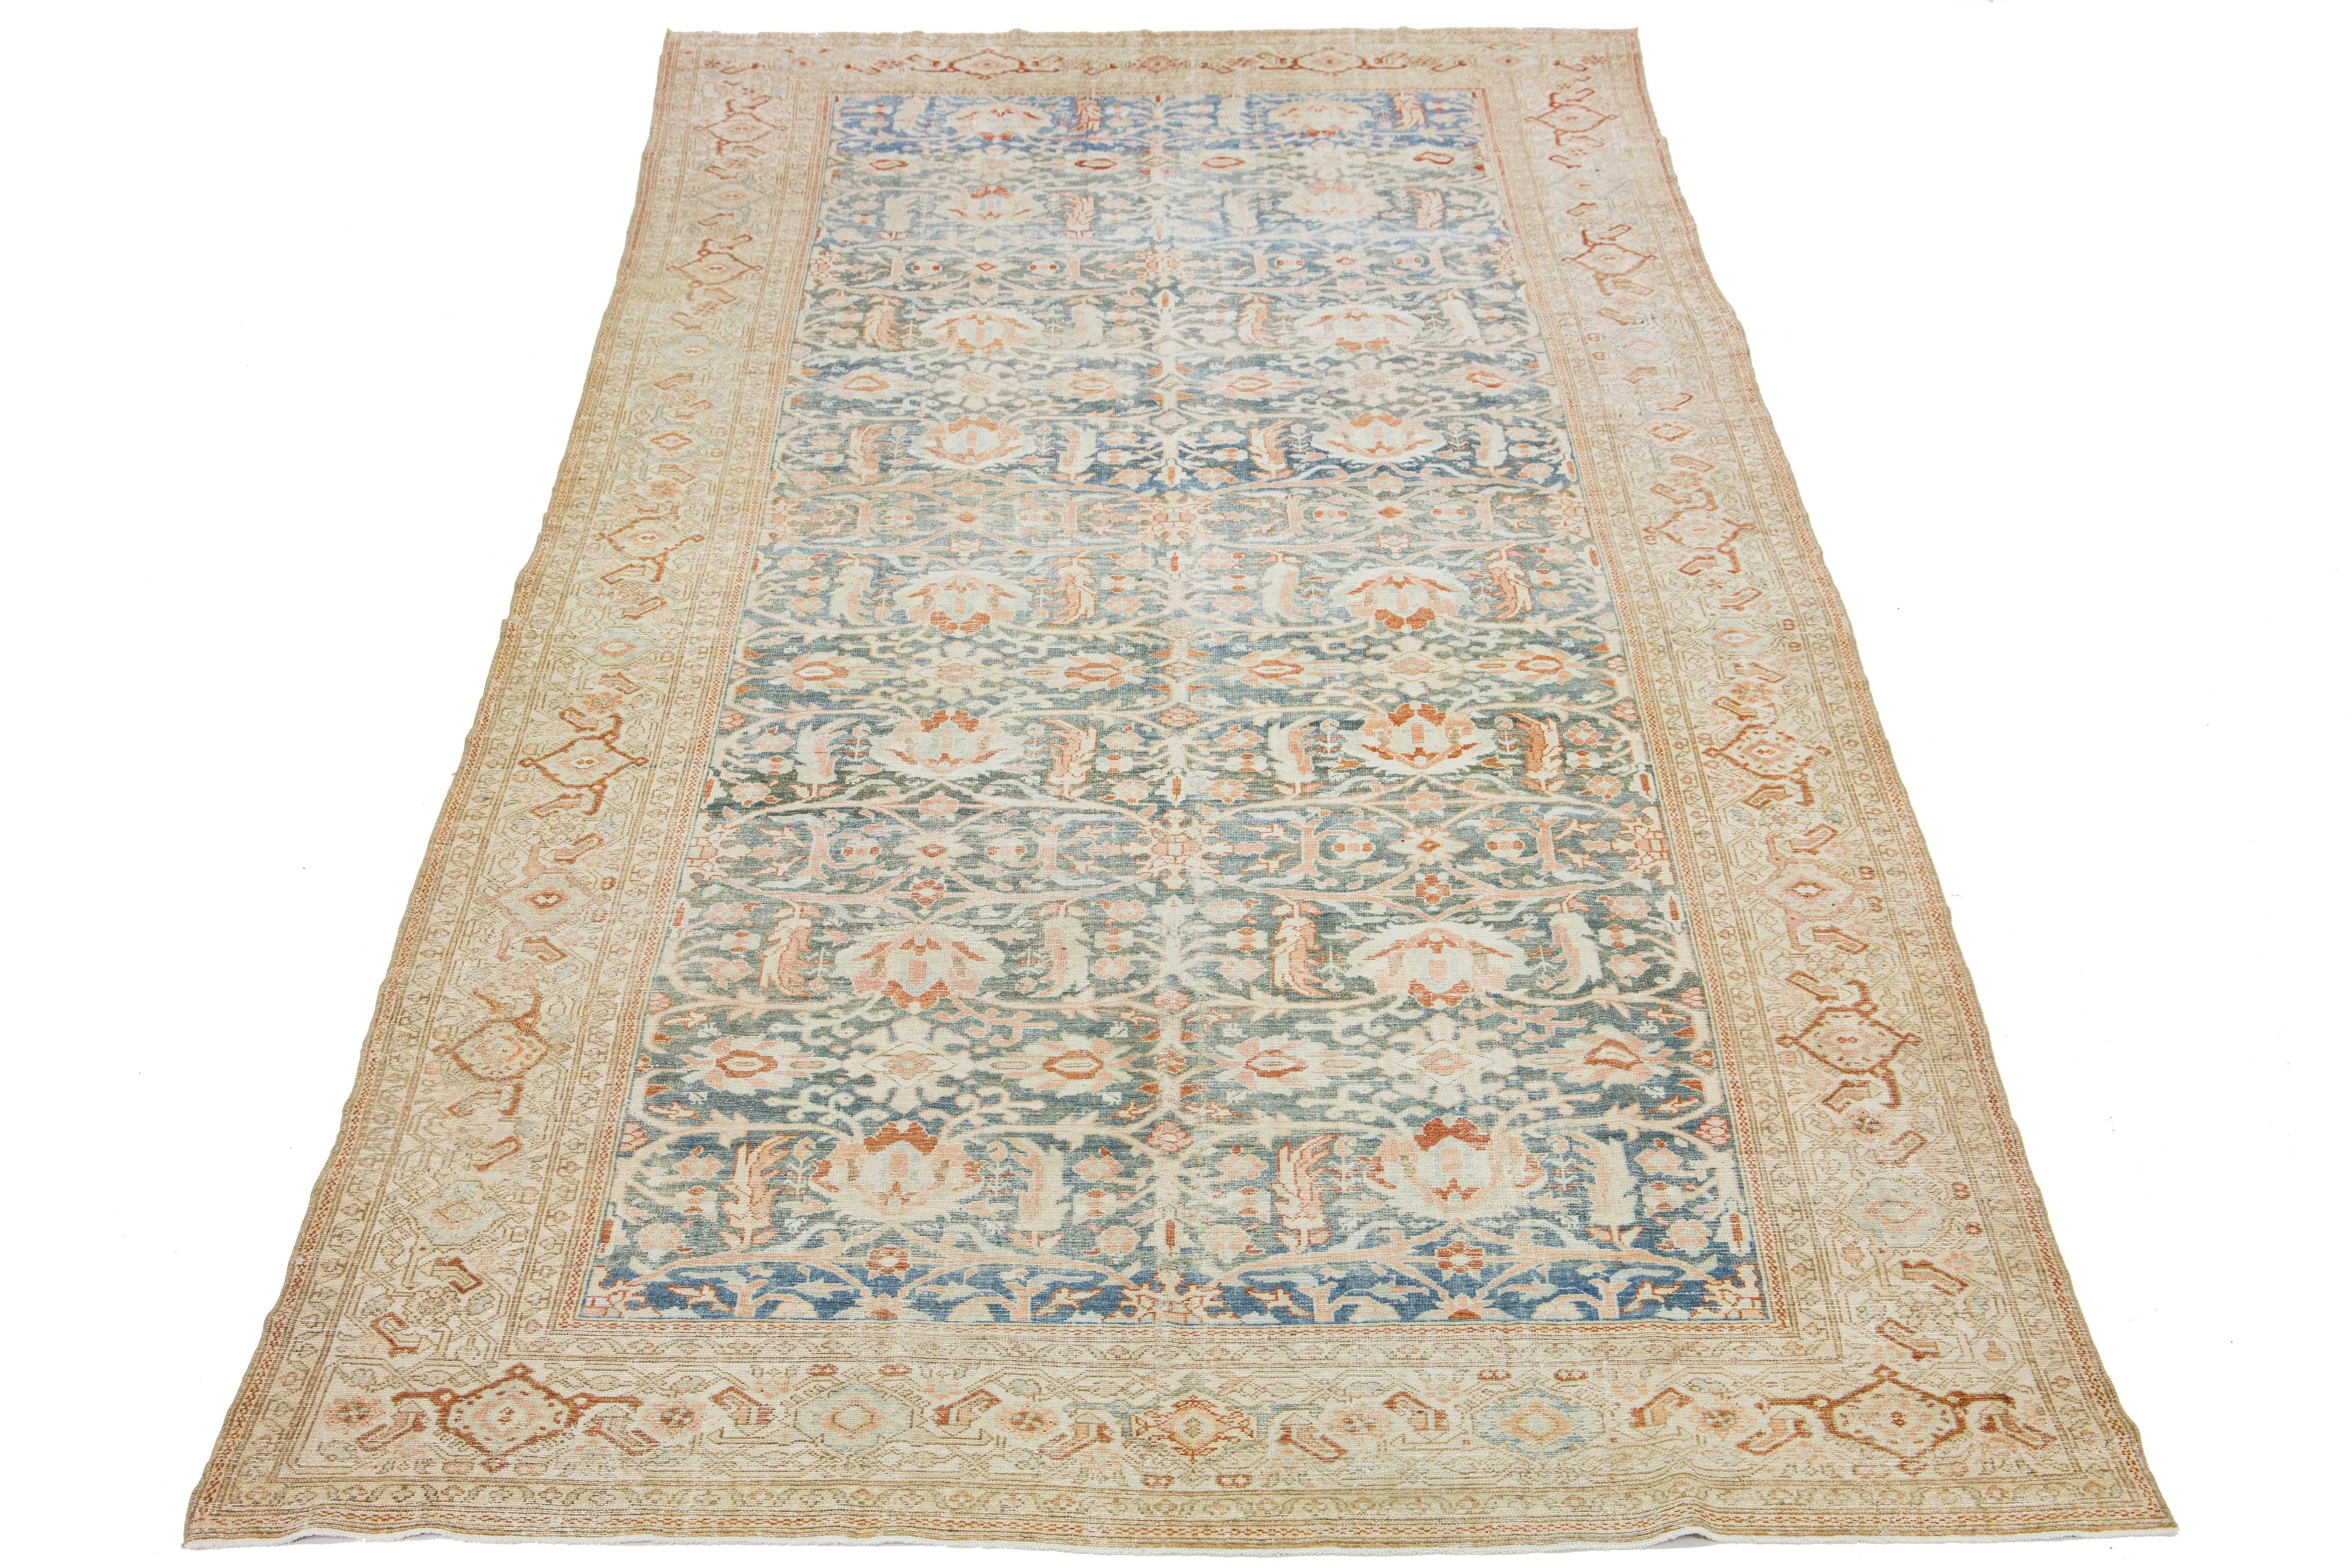 This exceptional, antique Persian Malayer rug is handcrafted from meticulously woven wool. The display features a calm light blue at its base, embellished with beige and peach highlights in an impressively intricate all-over classical floral